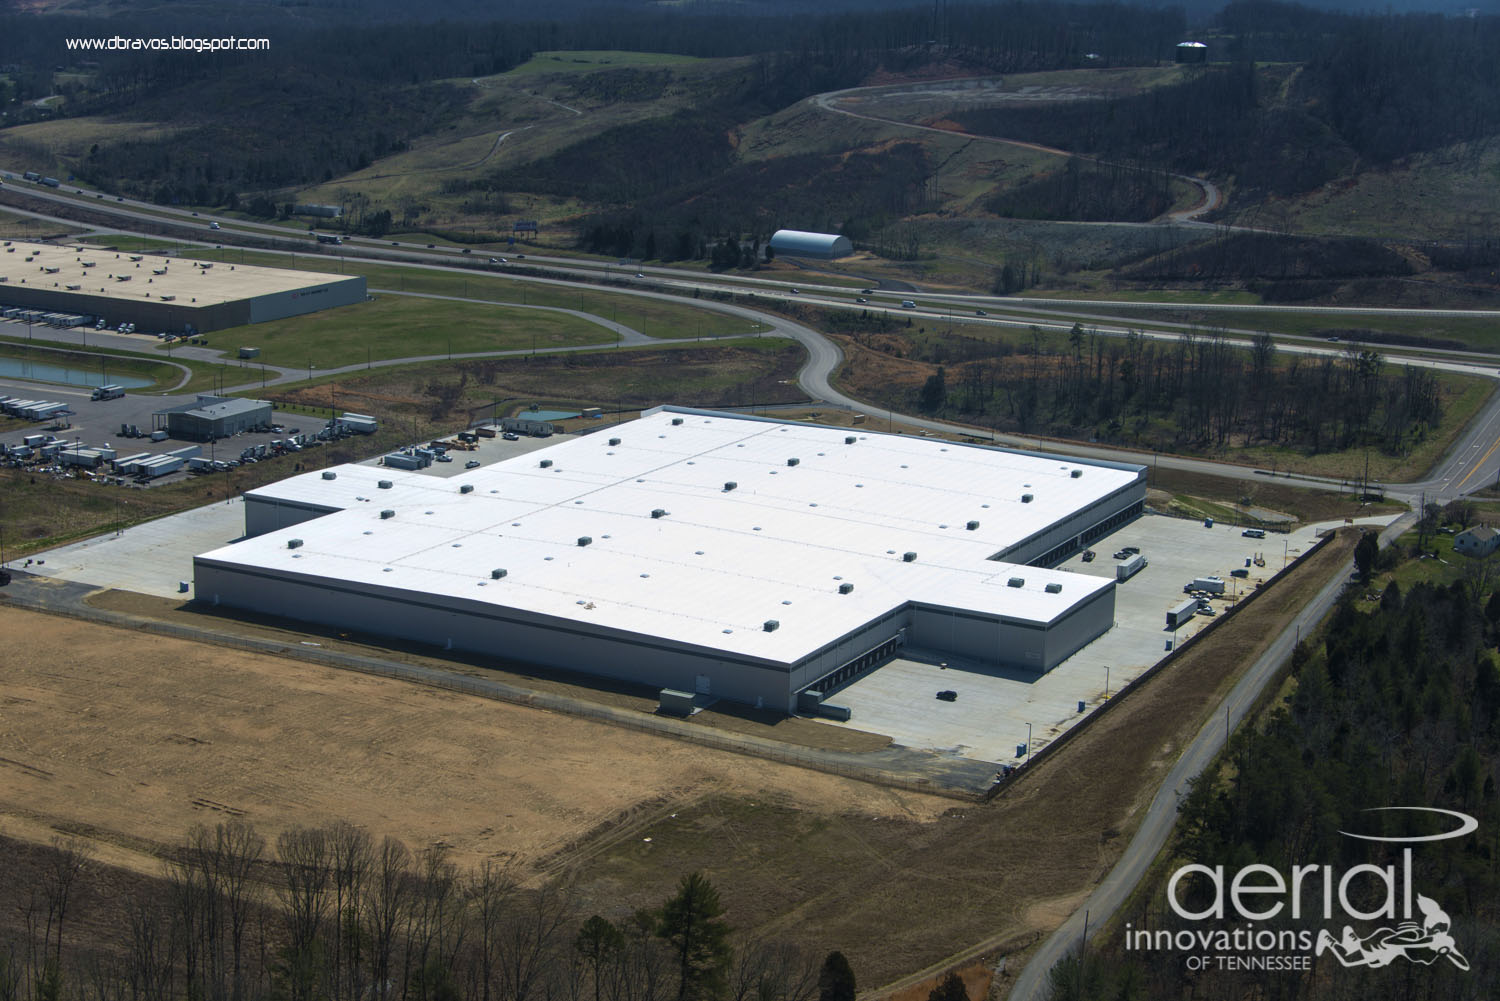 VolkswagenGroup America continues further Investment Tennessee